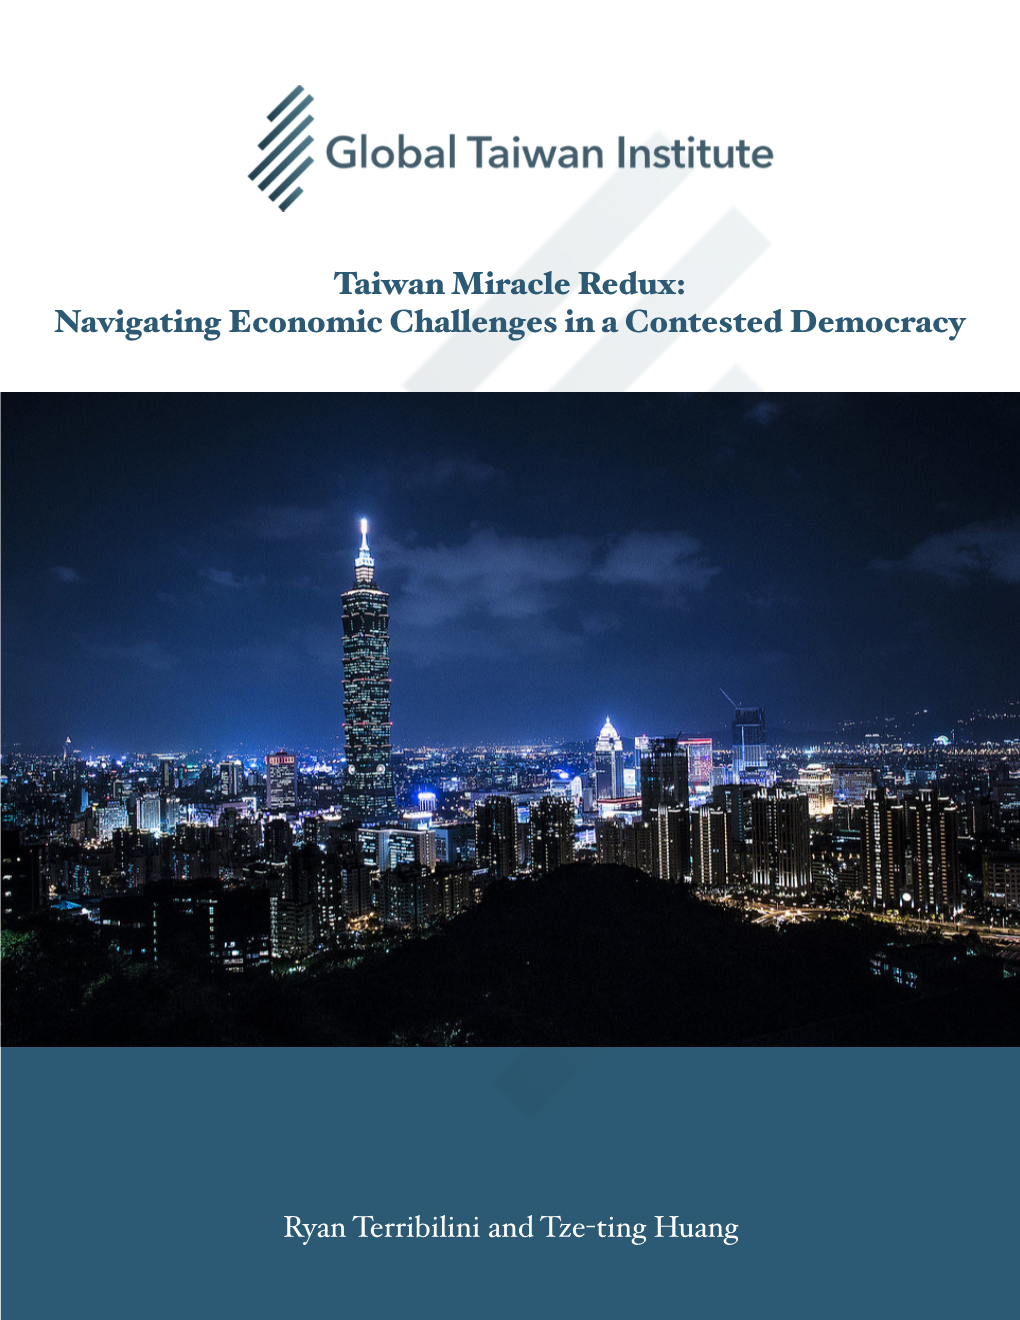 Taiwan Miracle Redux: Navigating Economic Challenges in a Contested Democracy